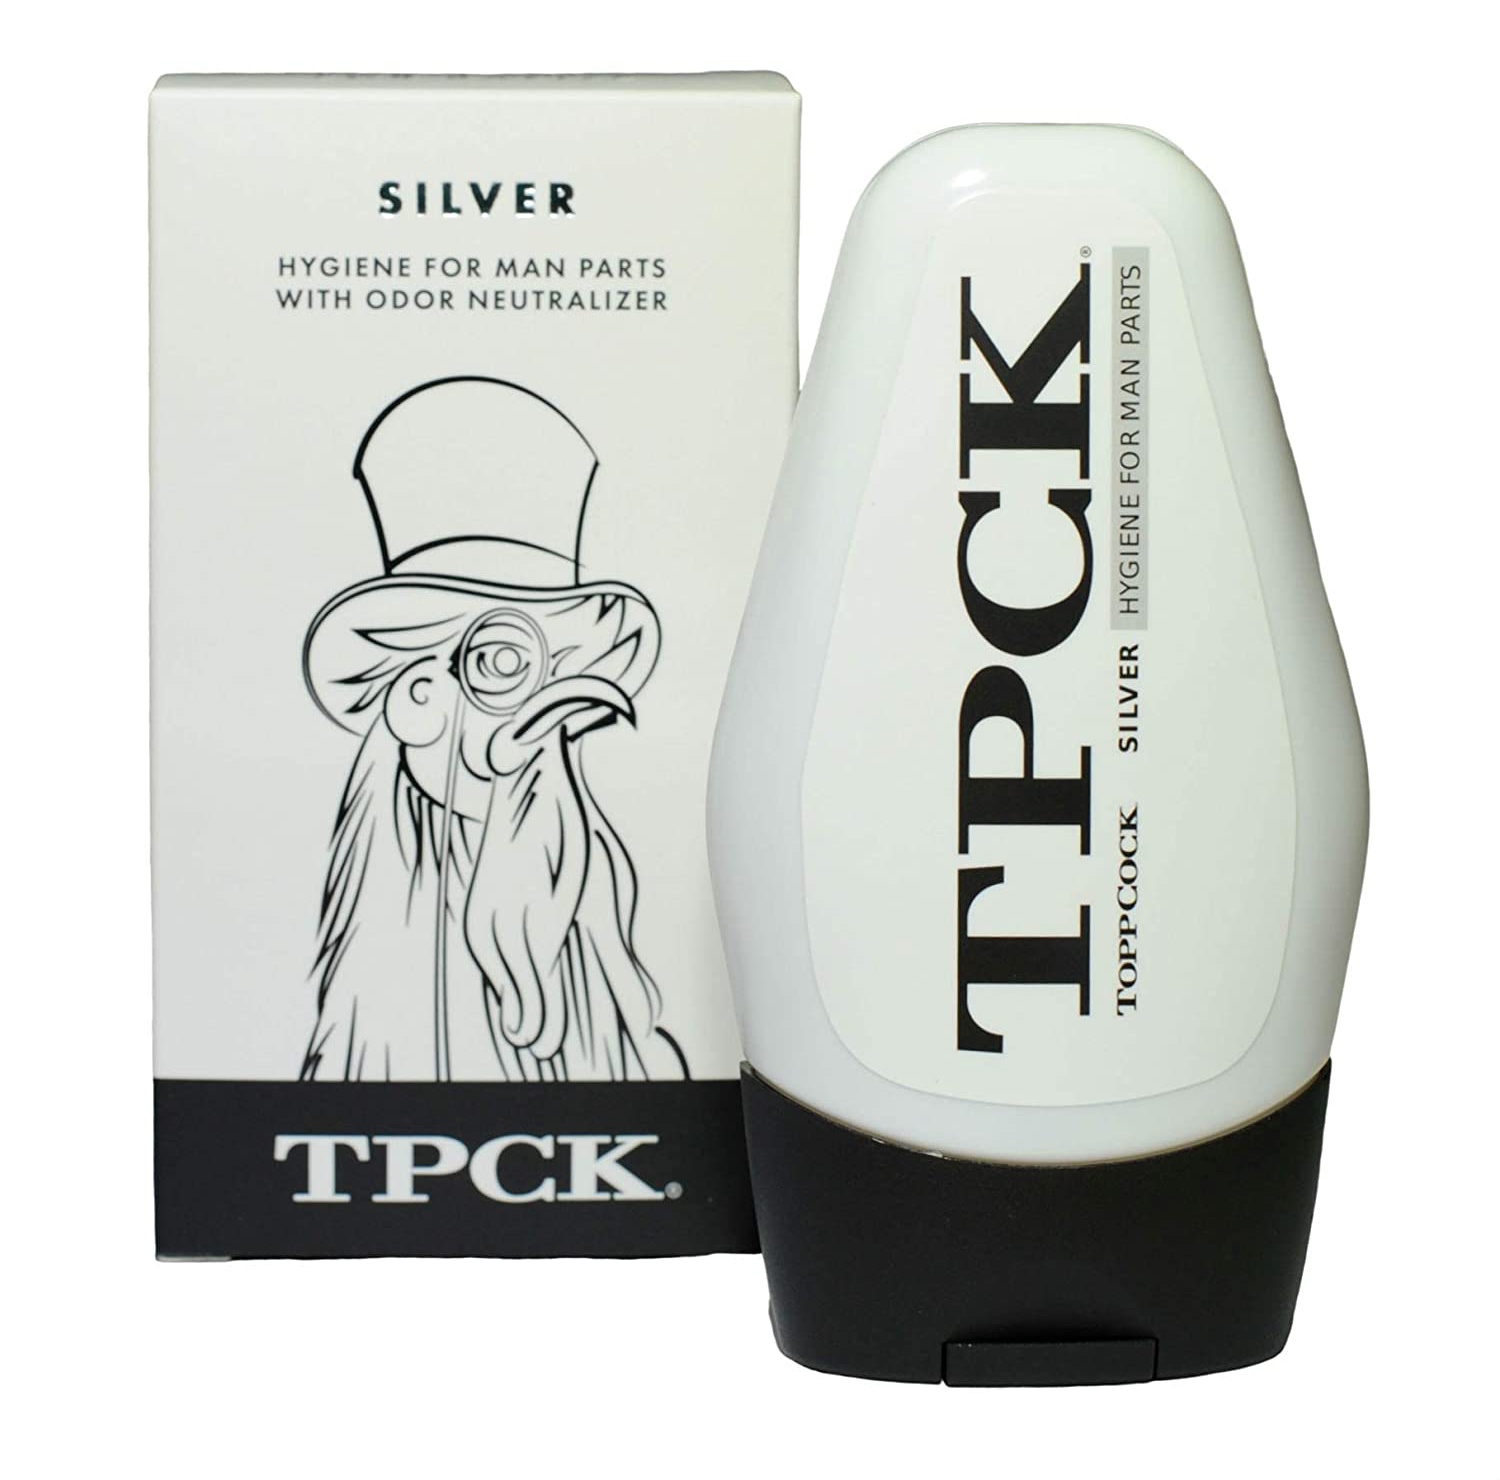 toppcock Silver Leave-On Hygiene For Man Parts